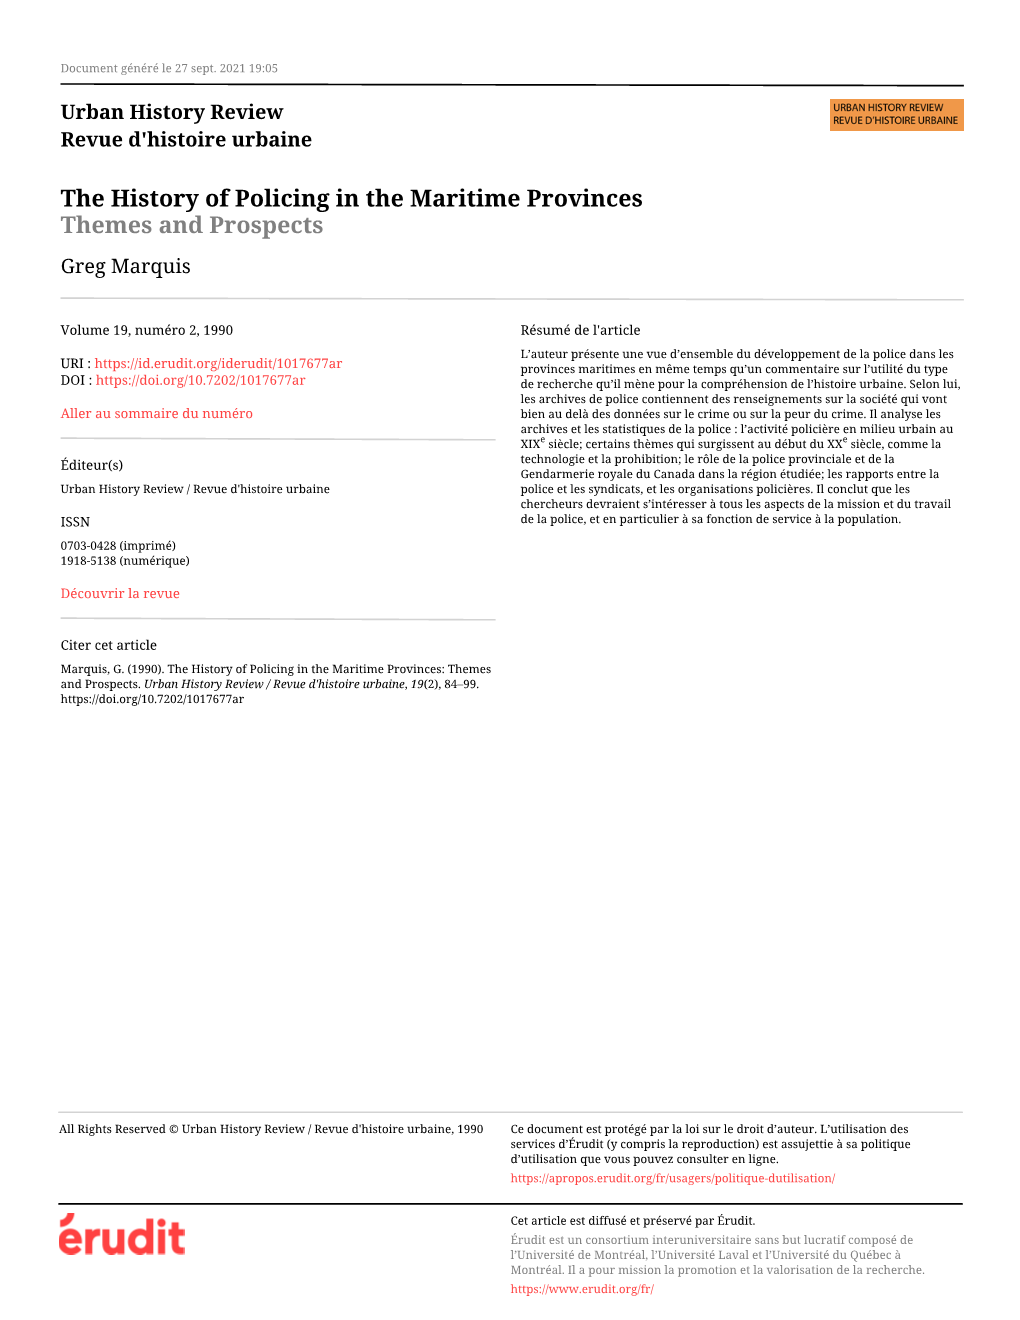 The History of Policing in the Maritime Provinces Themes and Prospects Greg Marquis